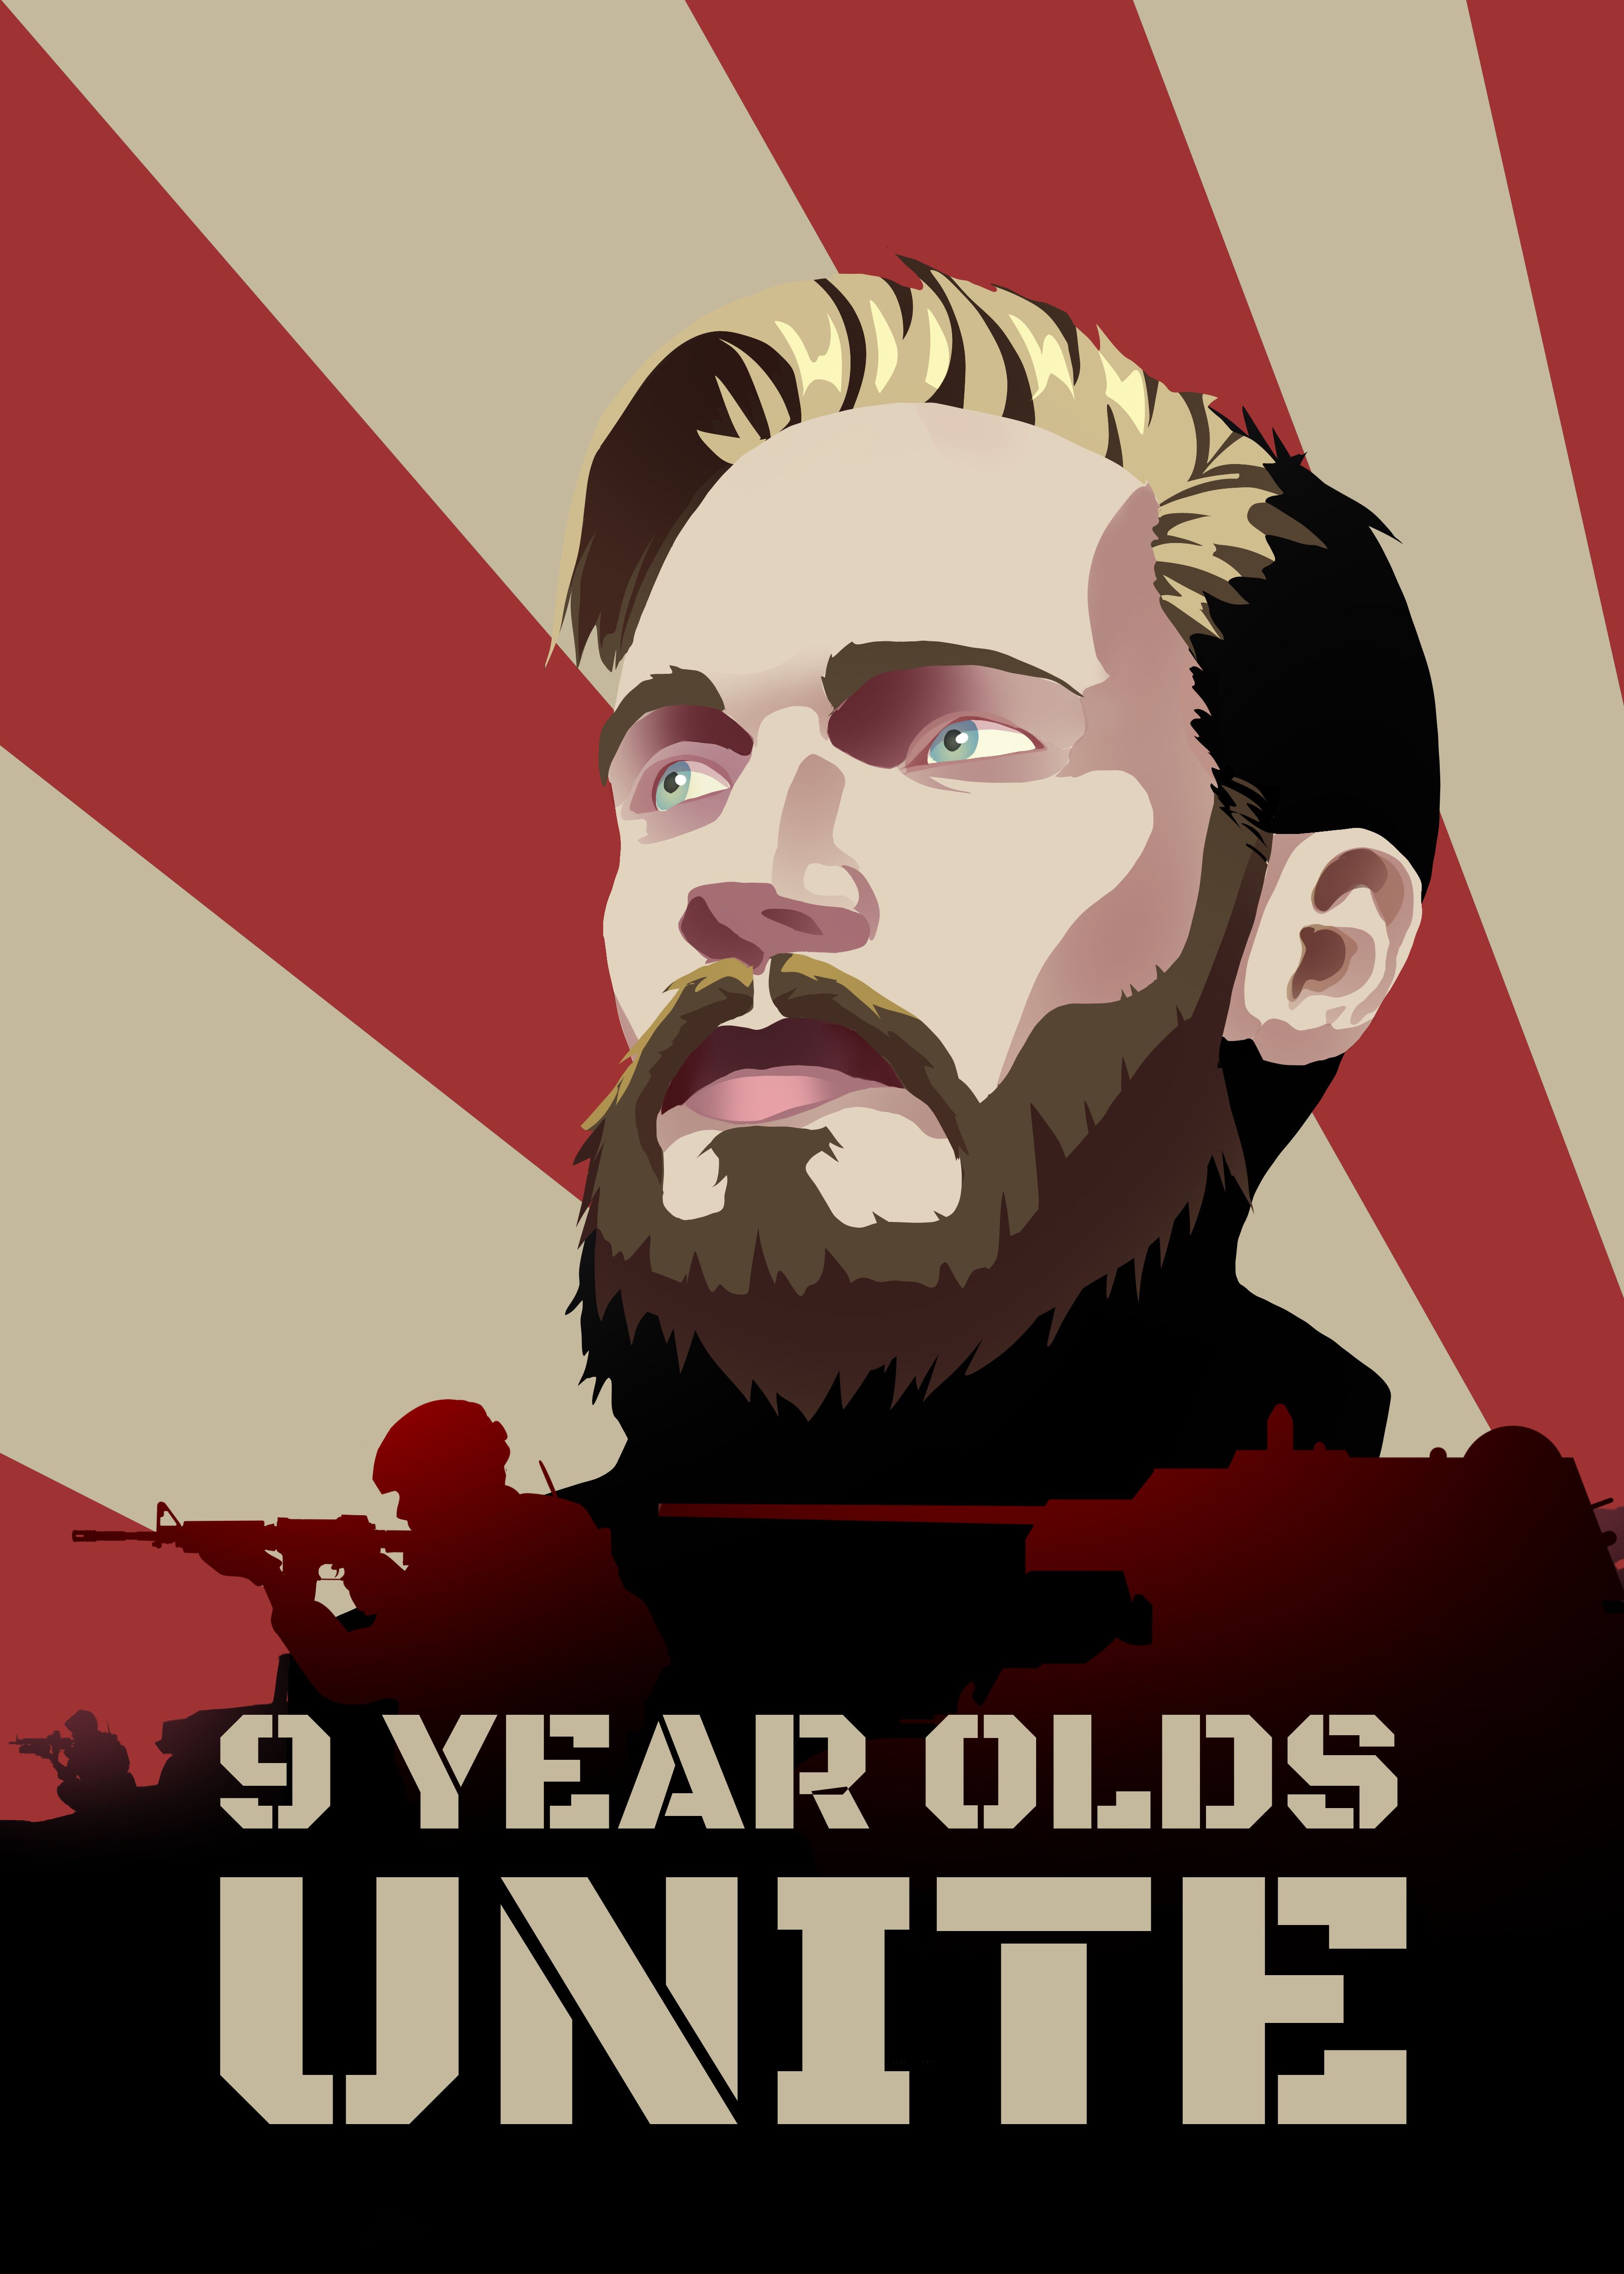 wallpapers for 9 year olds,facial hair,poster,beard,photo caption,font